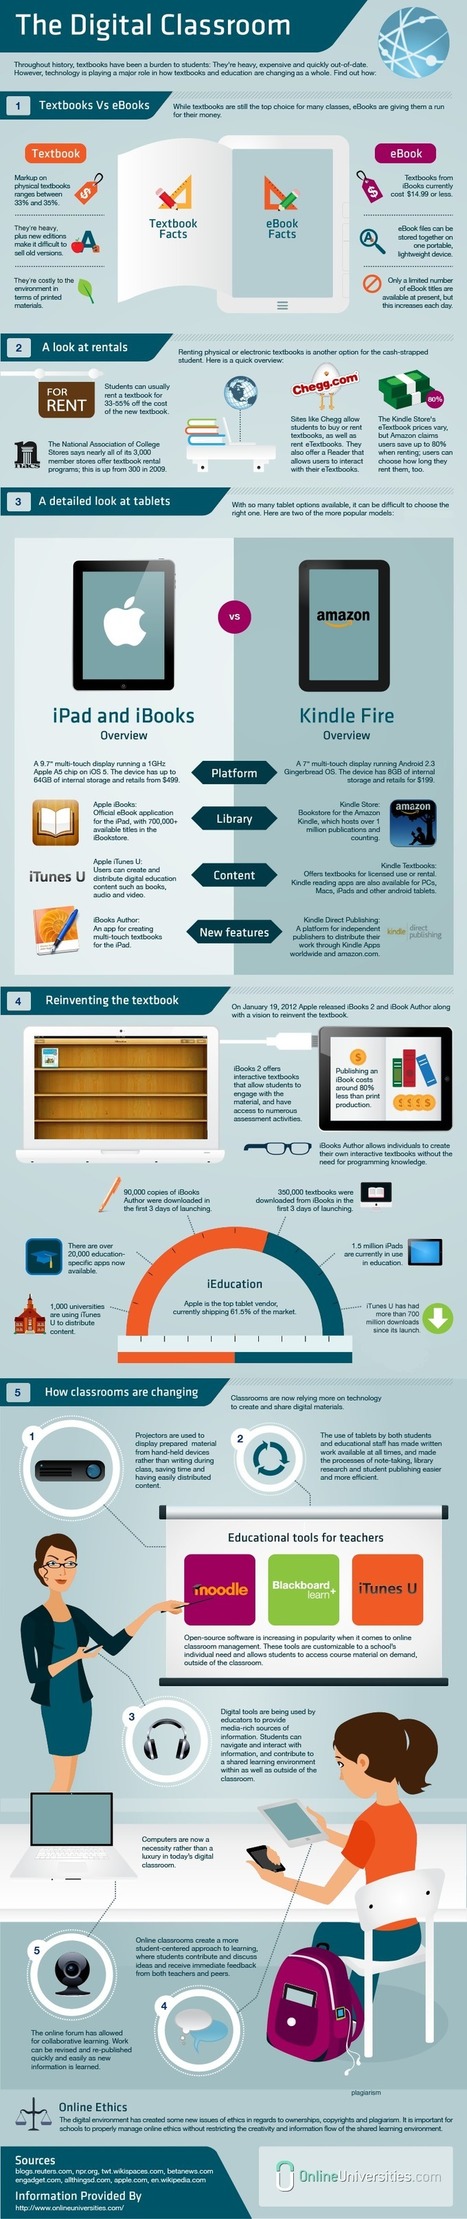 The 5 Important Elements of The 21st Century Classroom [Infographic] | Latest Social Media News | Scoop.it